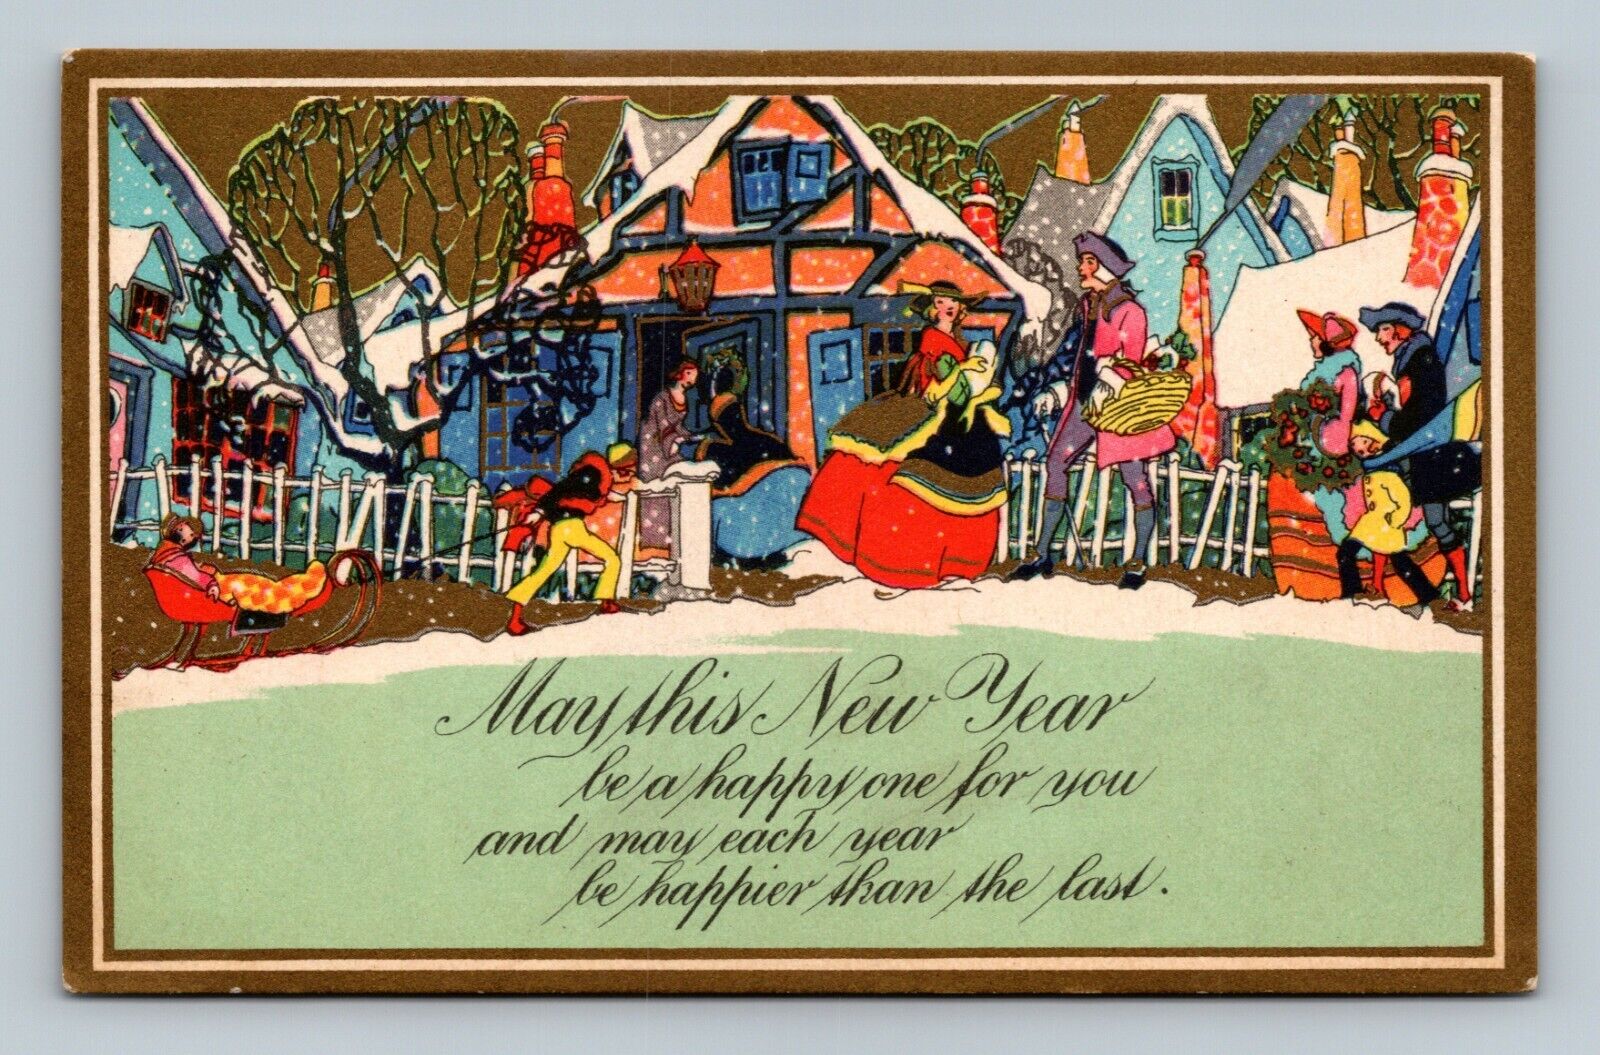 Postcard May this new year be a happy one